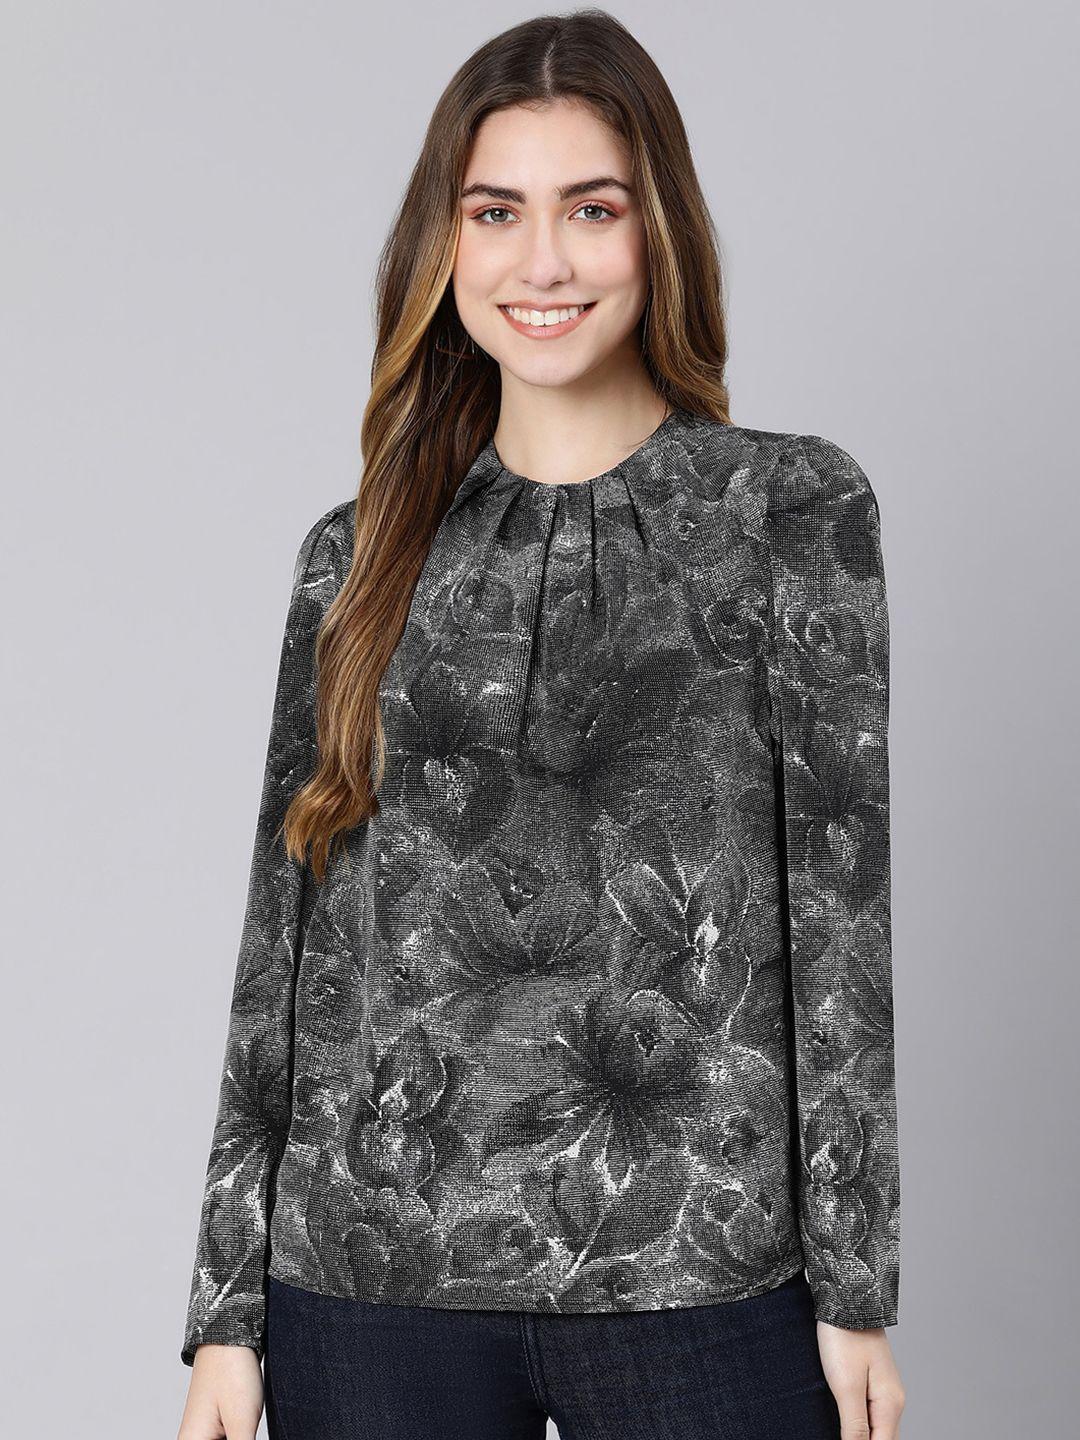 Oxolloxo Black & Grey Floral Printed Full Sleeves Satin Top